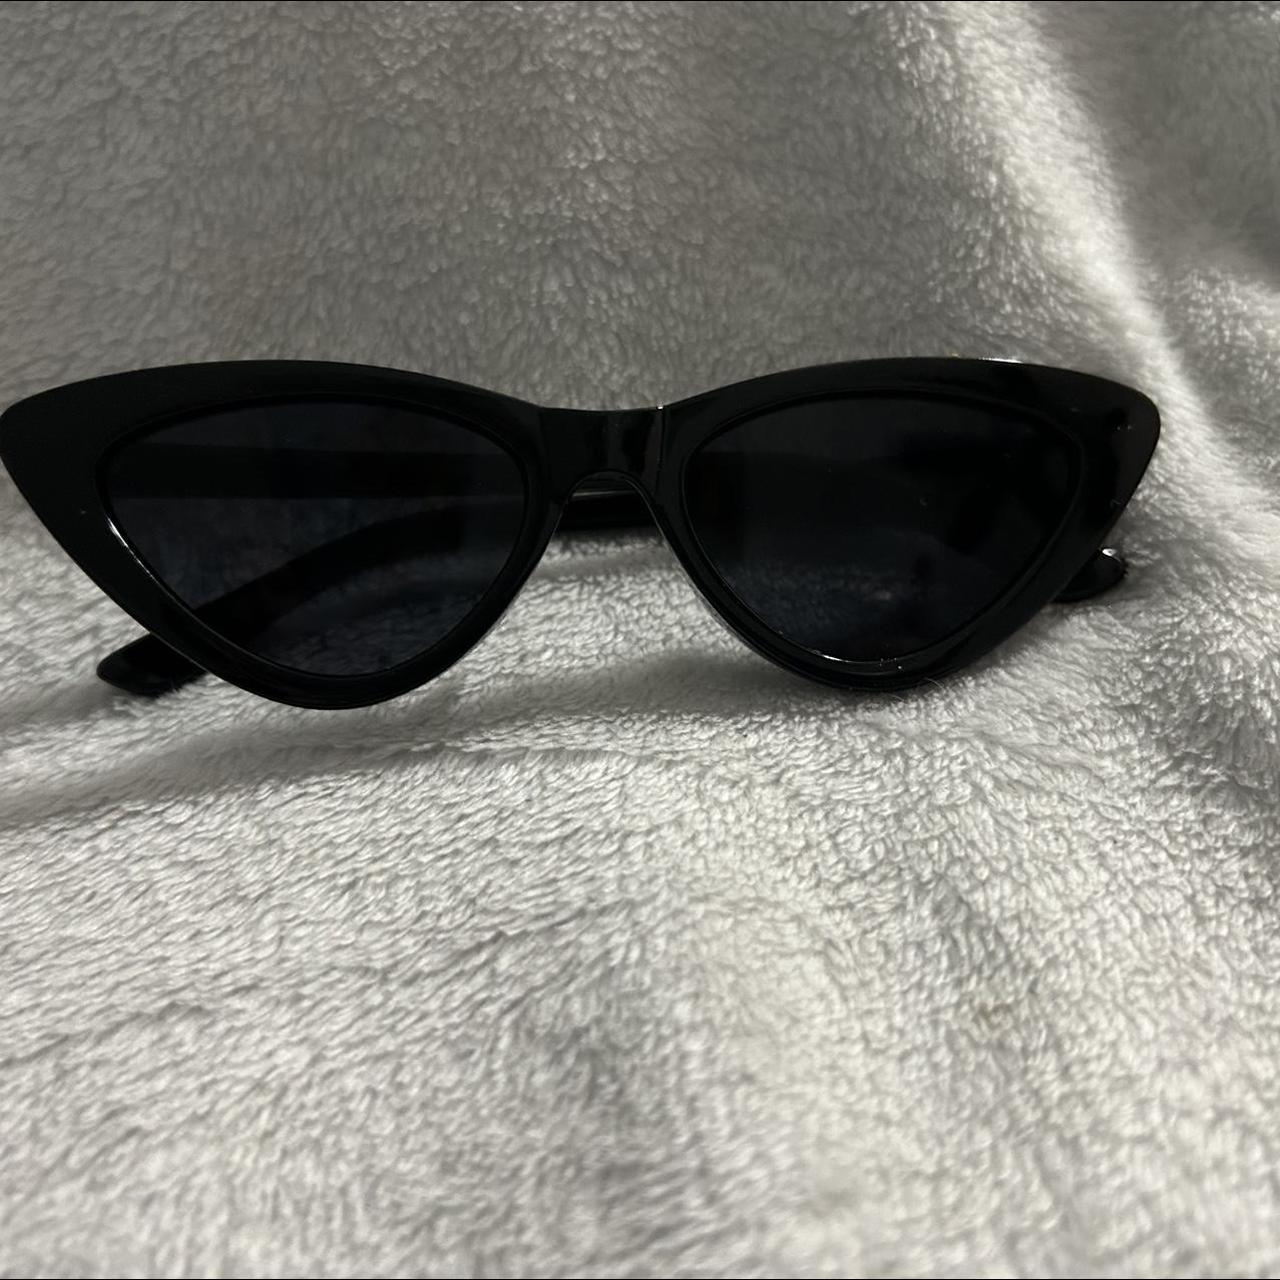 Cat eye sunglasses from Cider , Never used and in